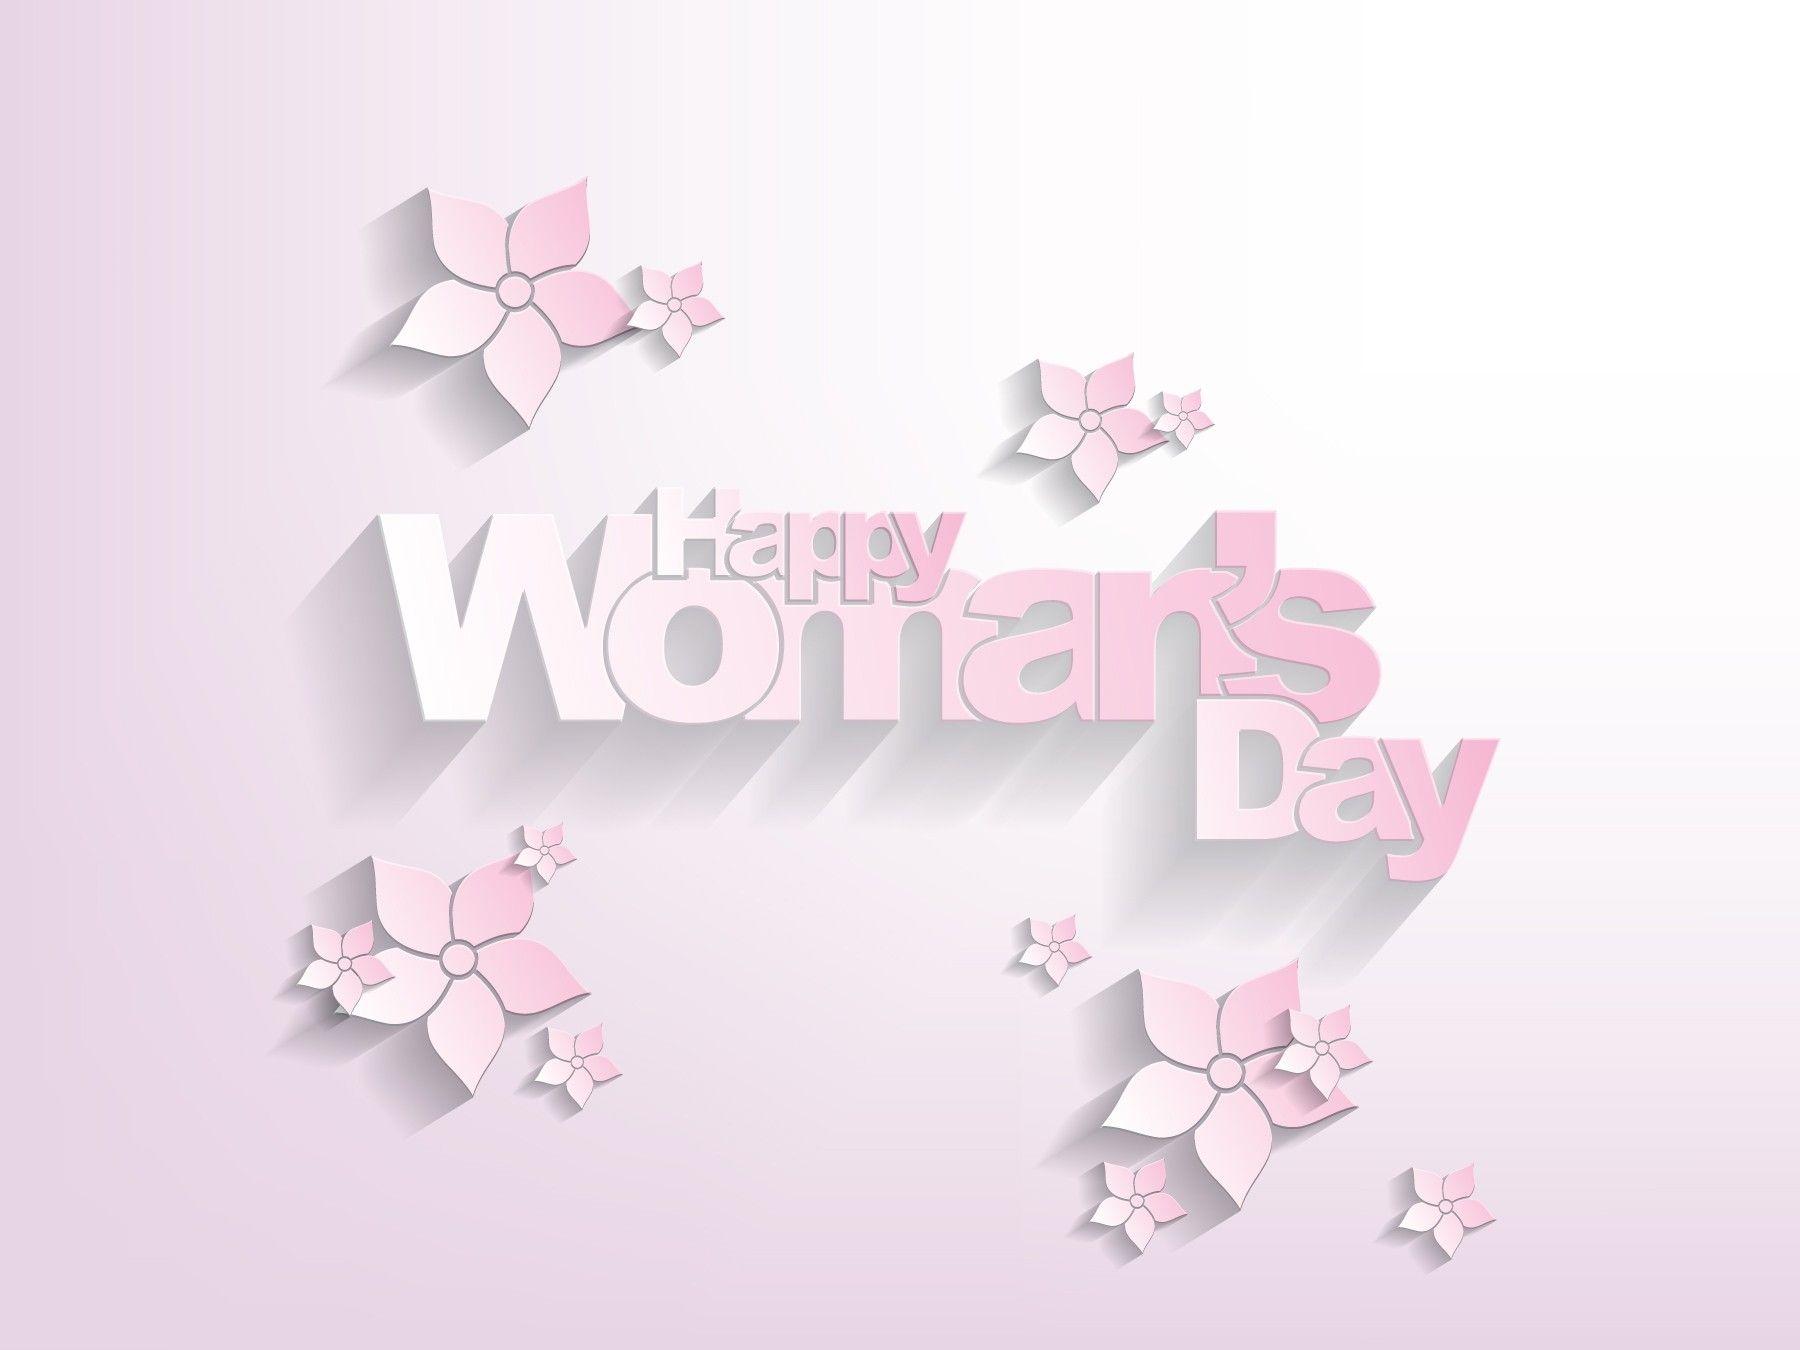 Happy woman's day with flowers on pink background. Happy woman